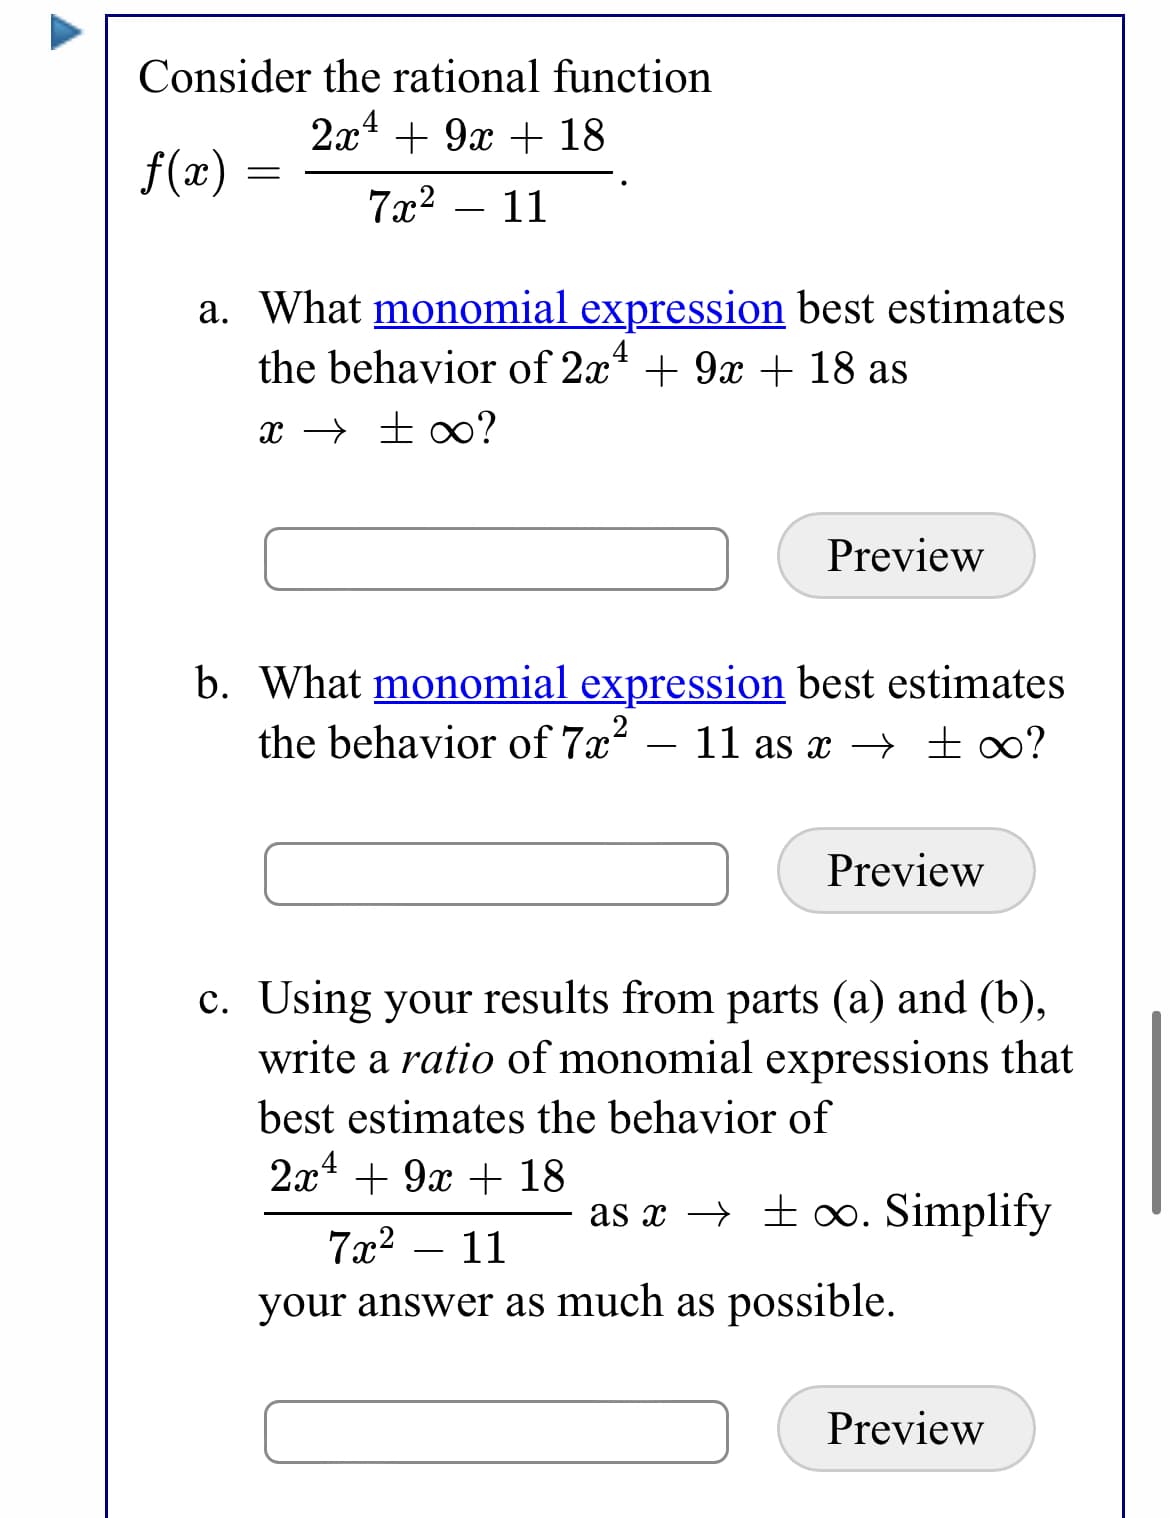 Consider the rational function
2а1 + 9х + 18
f(x) :
7x2 – 11
a. What monomial expression best estimates
the behavior of 2x* + 9x + 18 as
x → ±∞?
Preview
b. What monomial expression best estimates
the behavior of 7x²
11 as x → ±∞?
-
Preview
c. Using your results from parts (a) and (b),
write a ratio of monomial expressions that
best estimates the behavior of
2x* + 9x + 18
as x → ± o. Simplify
7x2
11
your answer as much as possible.
Preview
